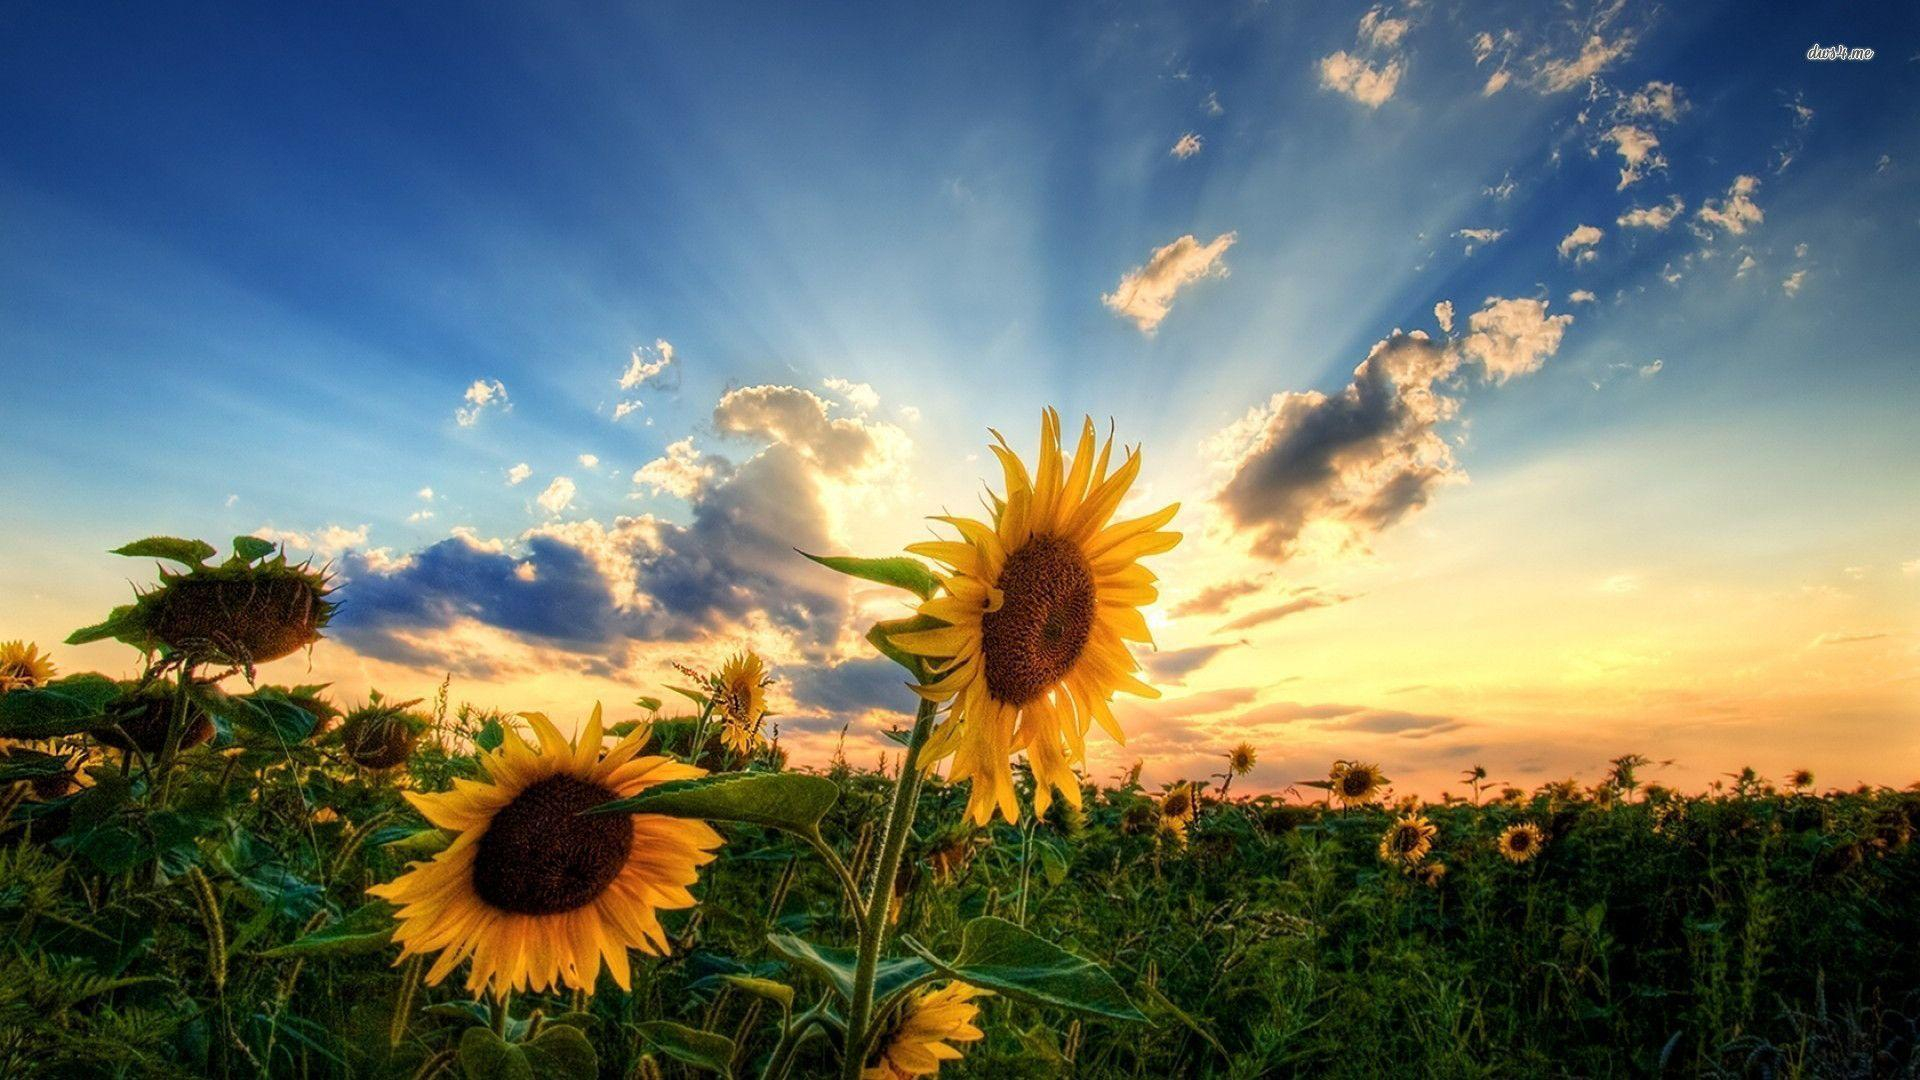 1920x1080 Sunflowers Wallpapers